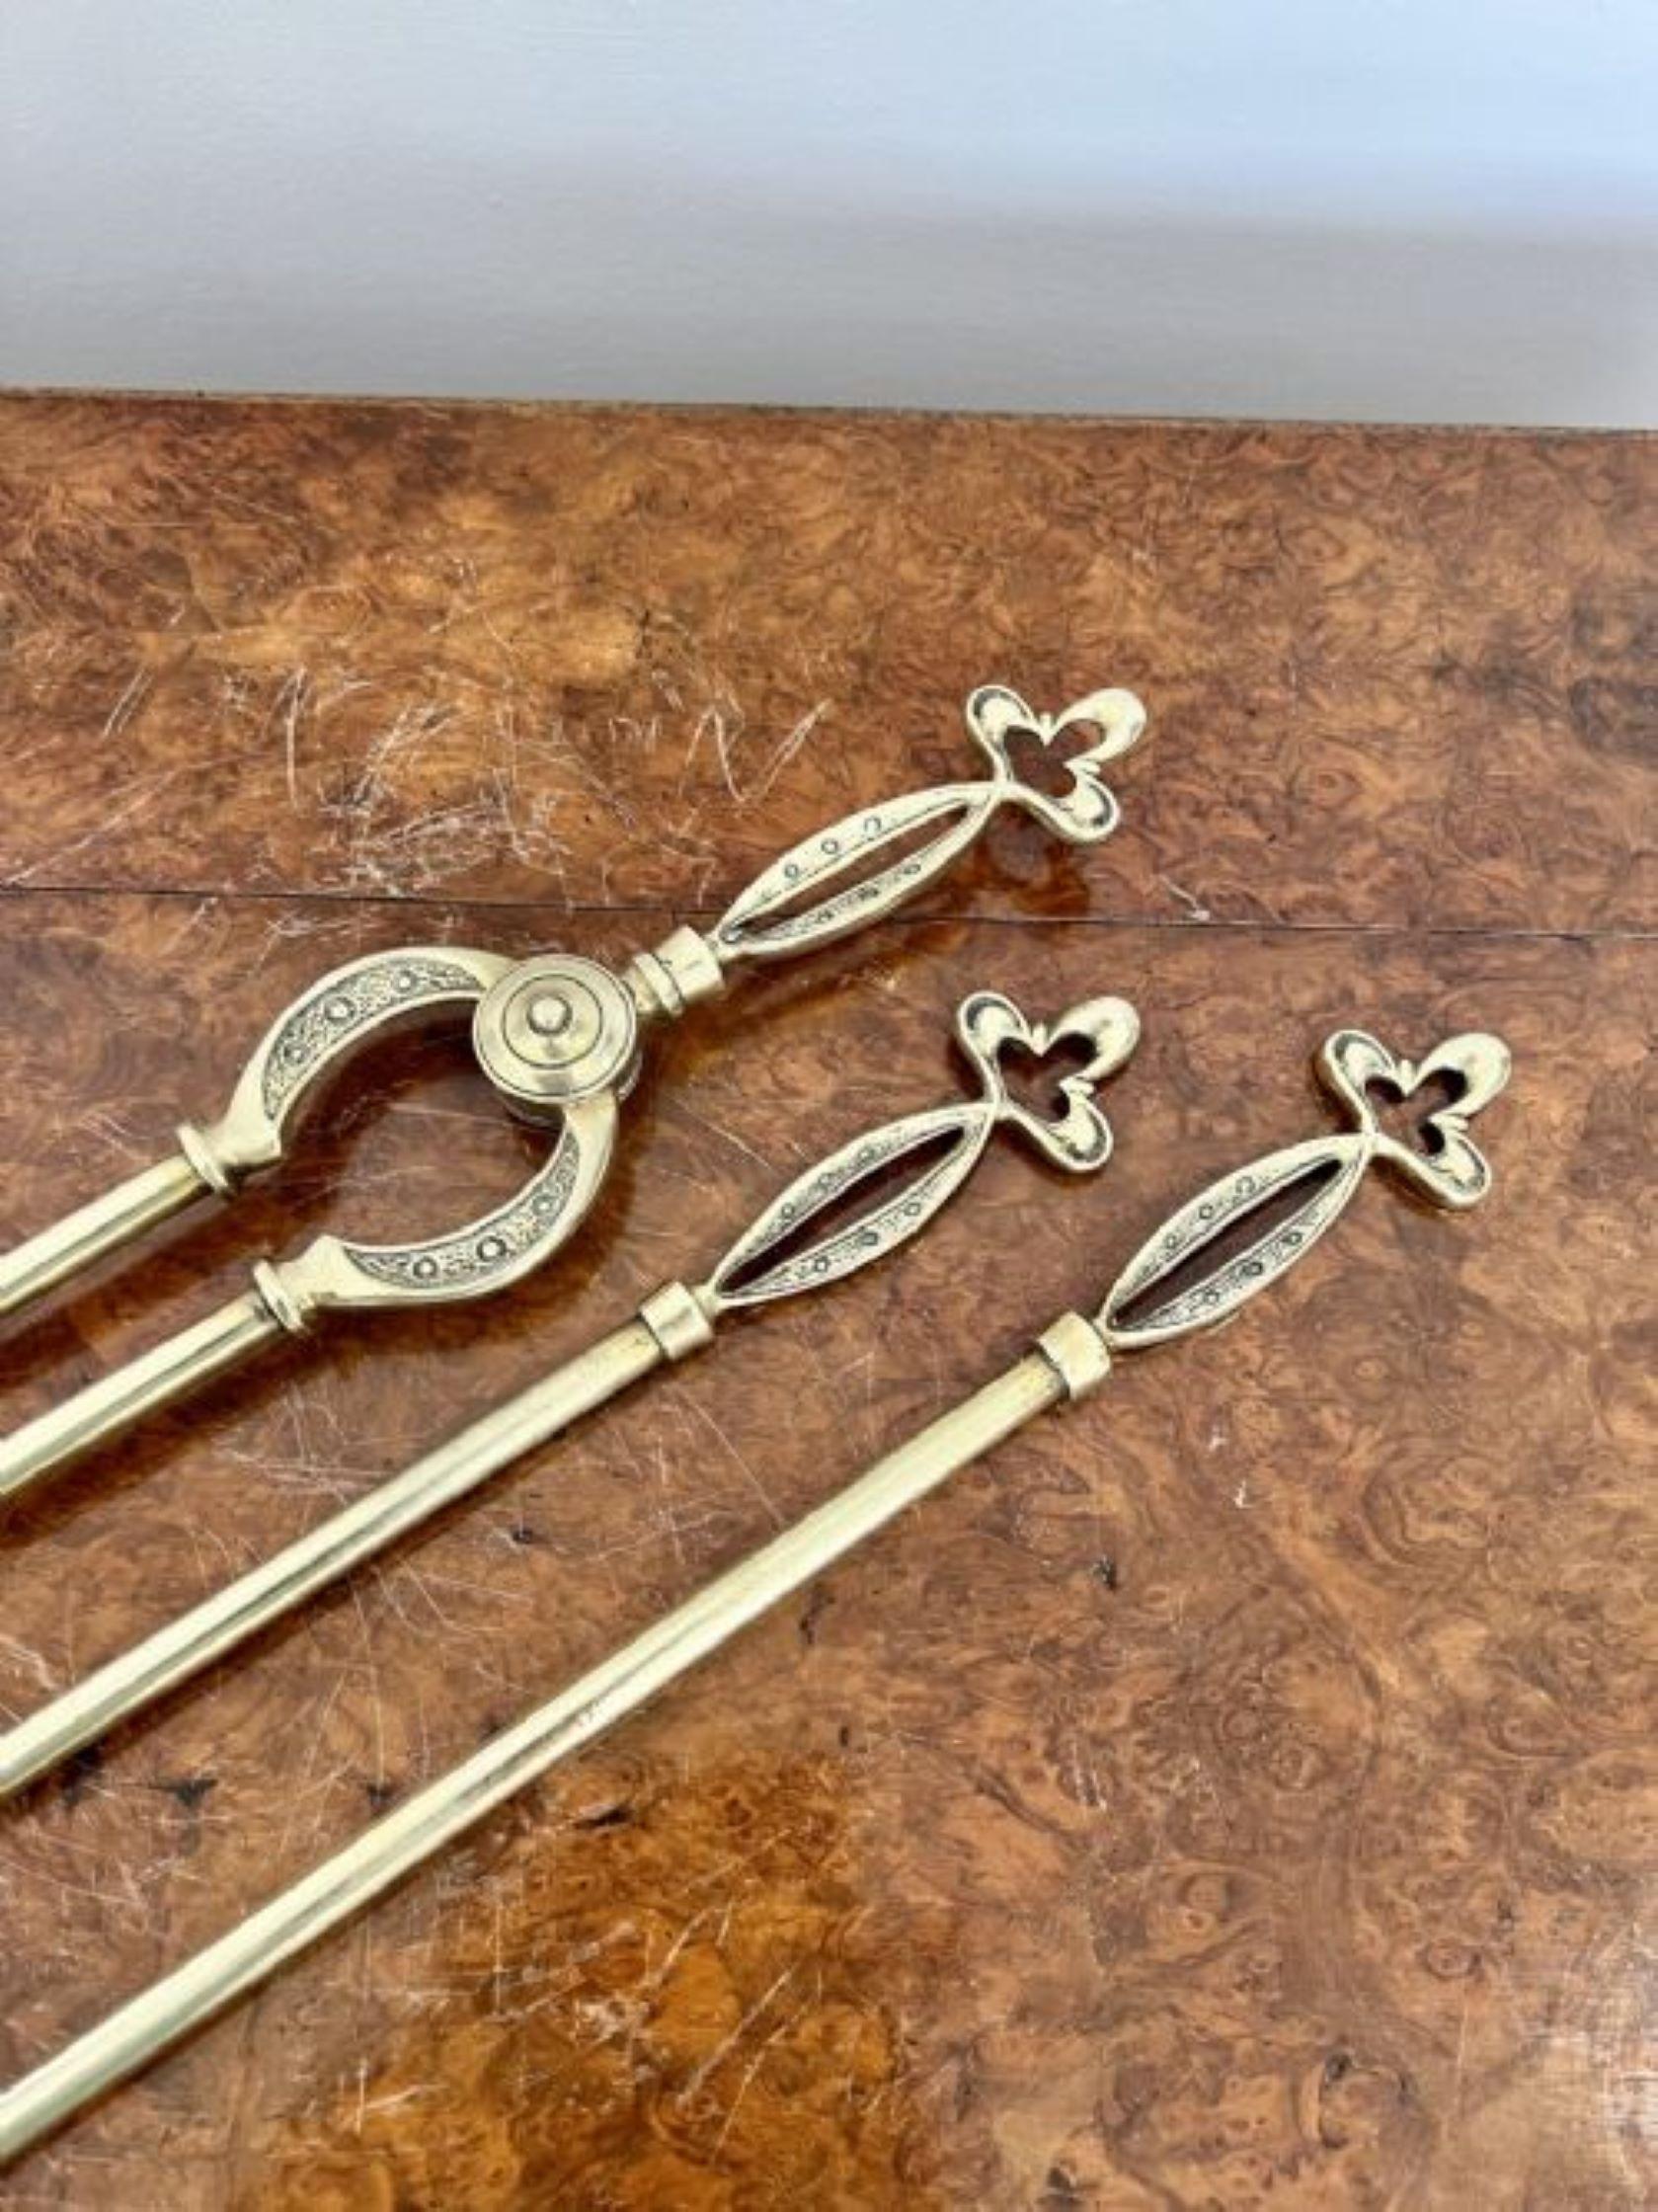 Antique Victorian quality brass fire irons and fire dogs having a quality set of antique Victorian fire irons consisting of a shovel, fire poker and fire tongs with a pair of original ornate fire dogs 